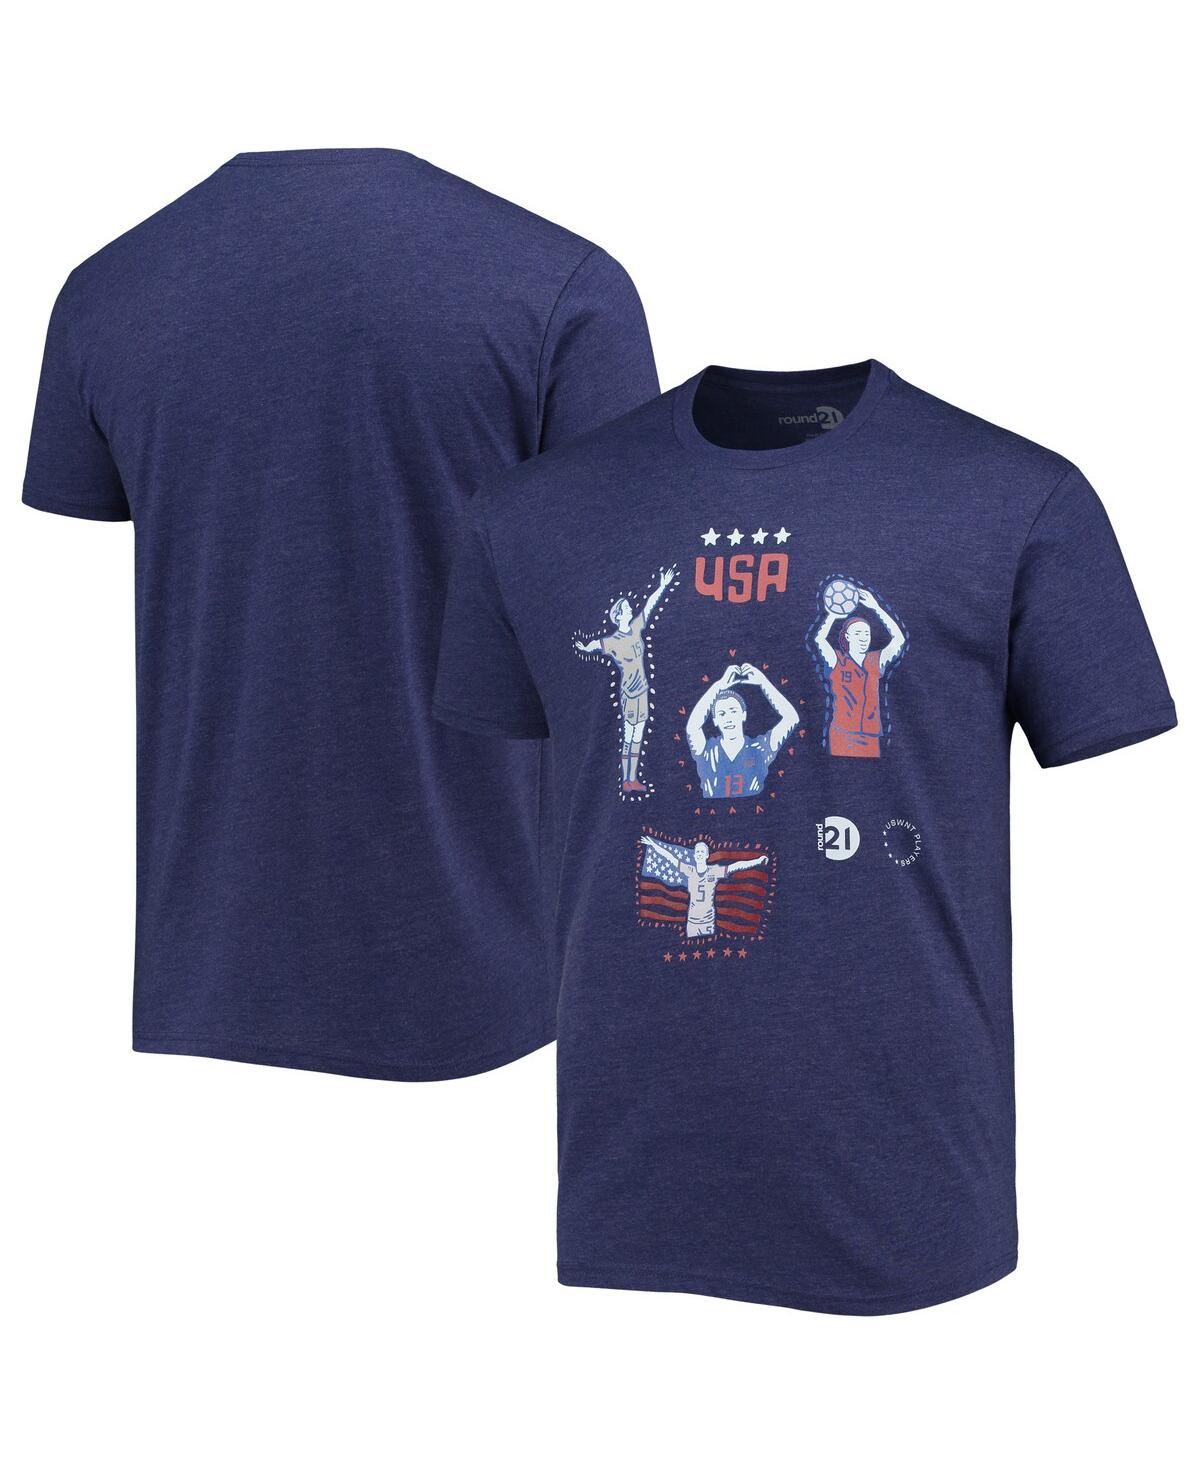 Shop Round21 Men's  Navy Uswnt One Team One Goal T-shirt